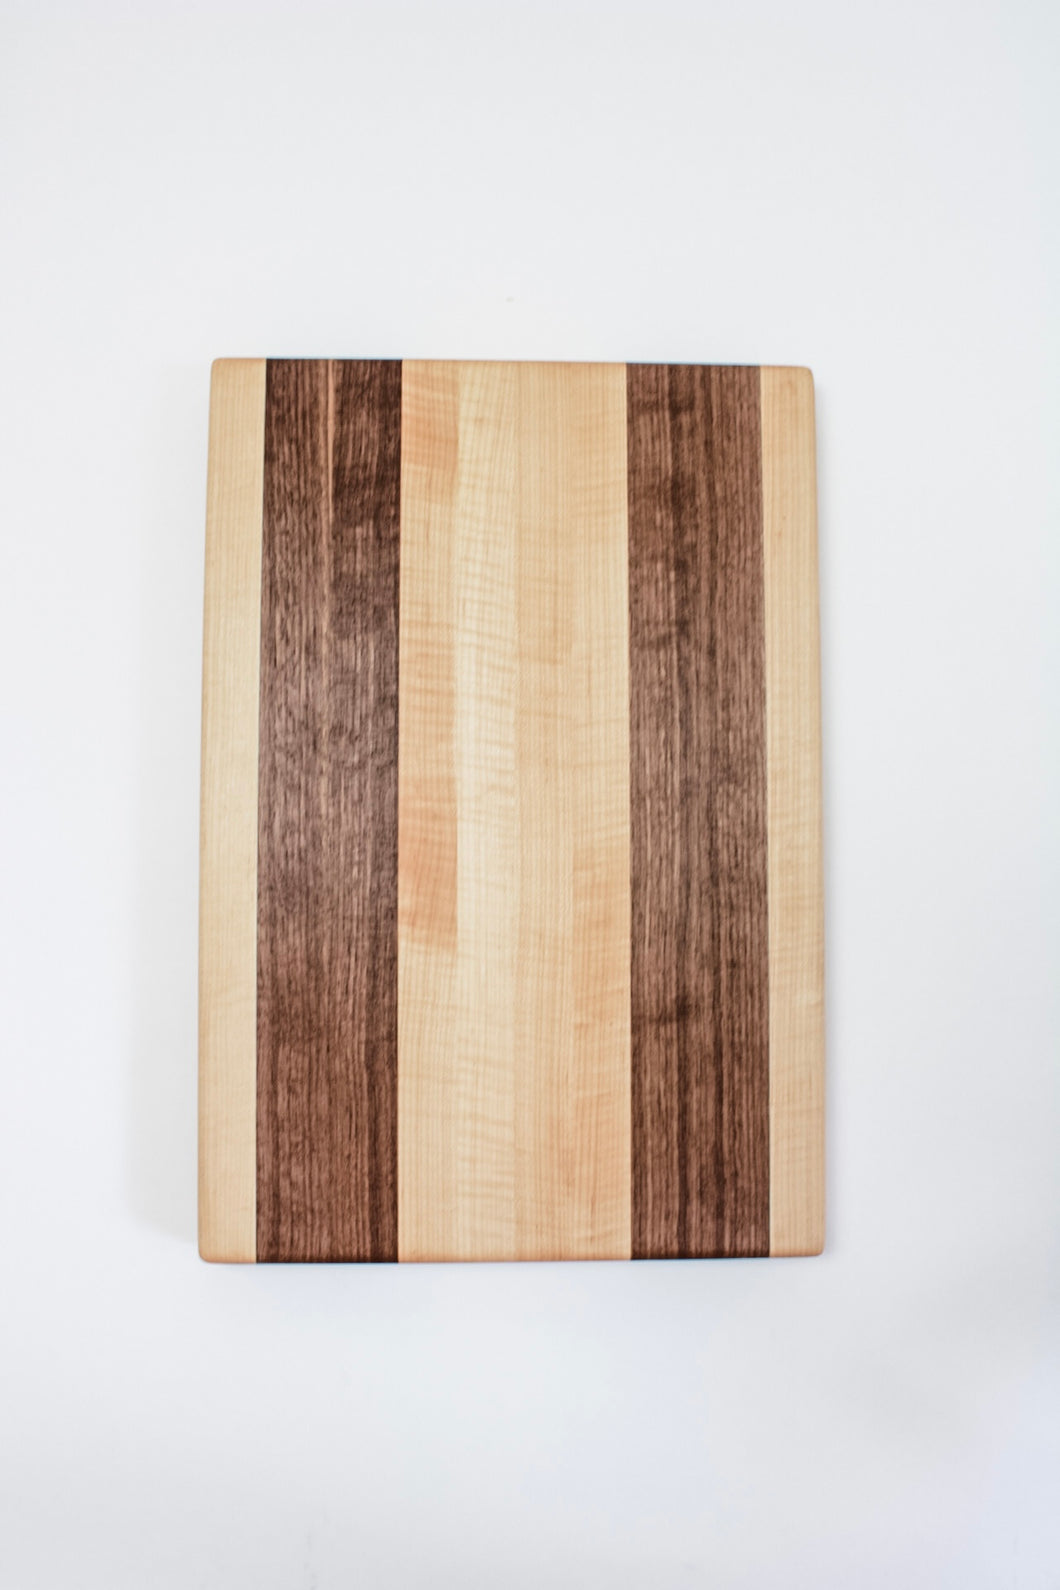 Handmade cutting board with alternating strips of walnut and hard maple wood.